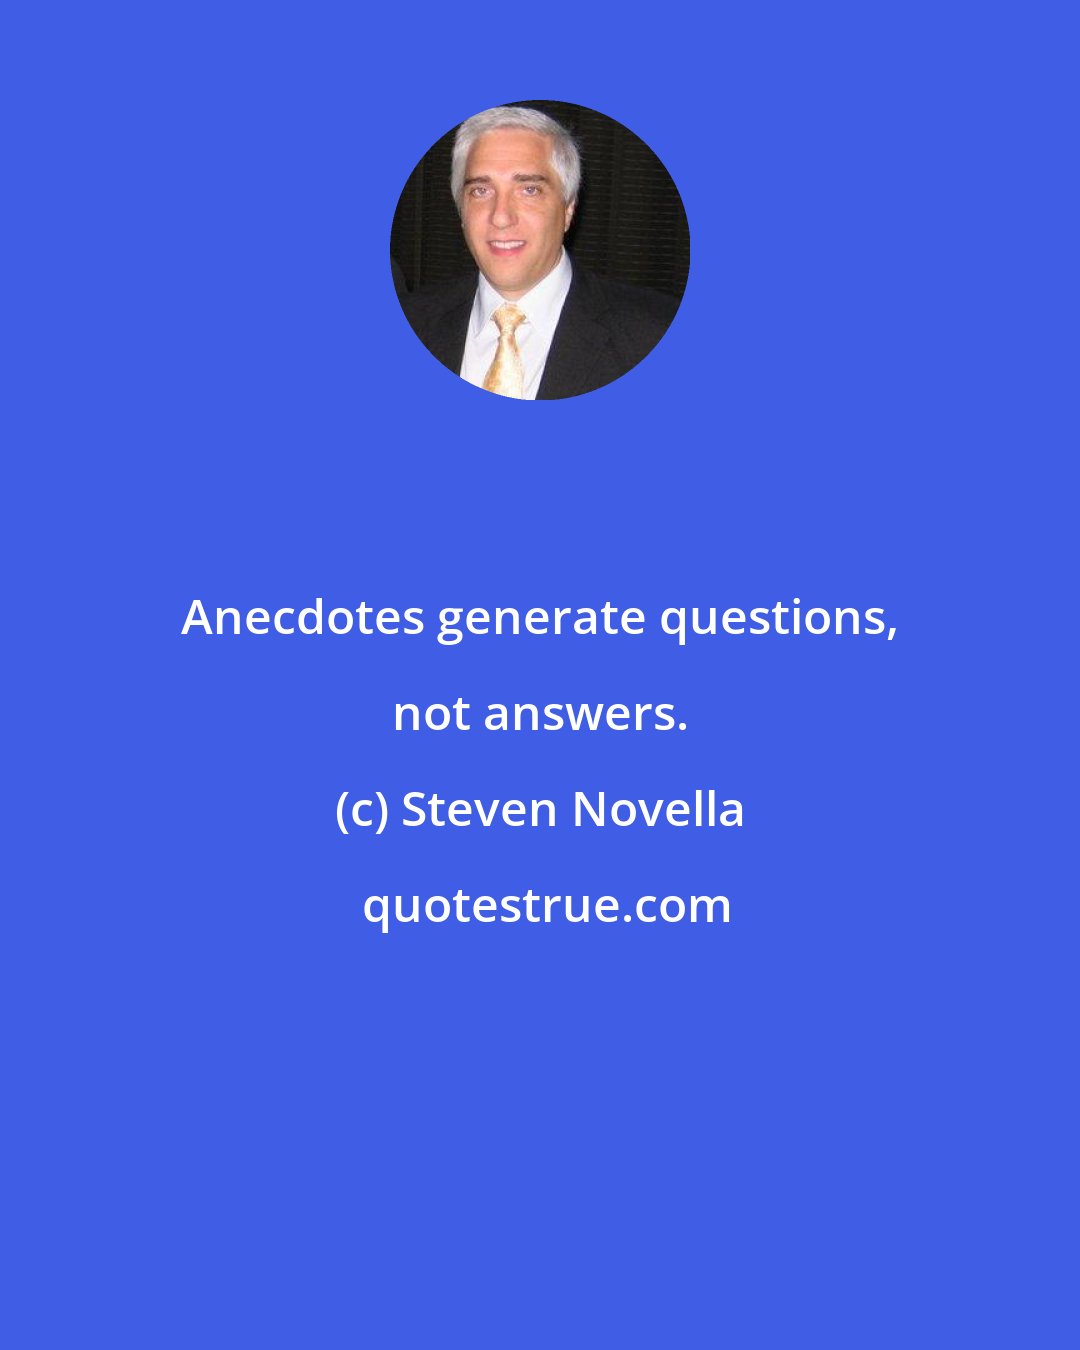 Steven Novella: Anecdotes generate questions, not answers.